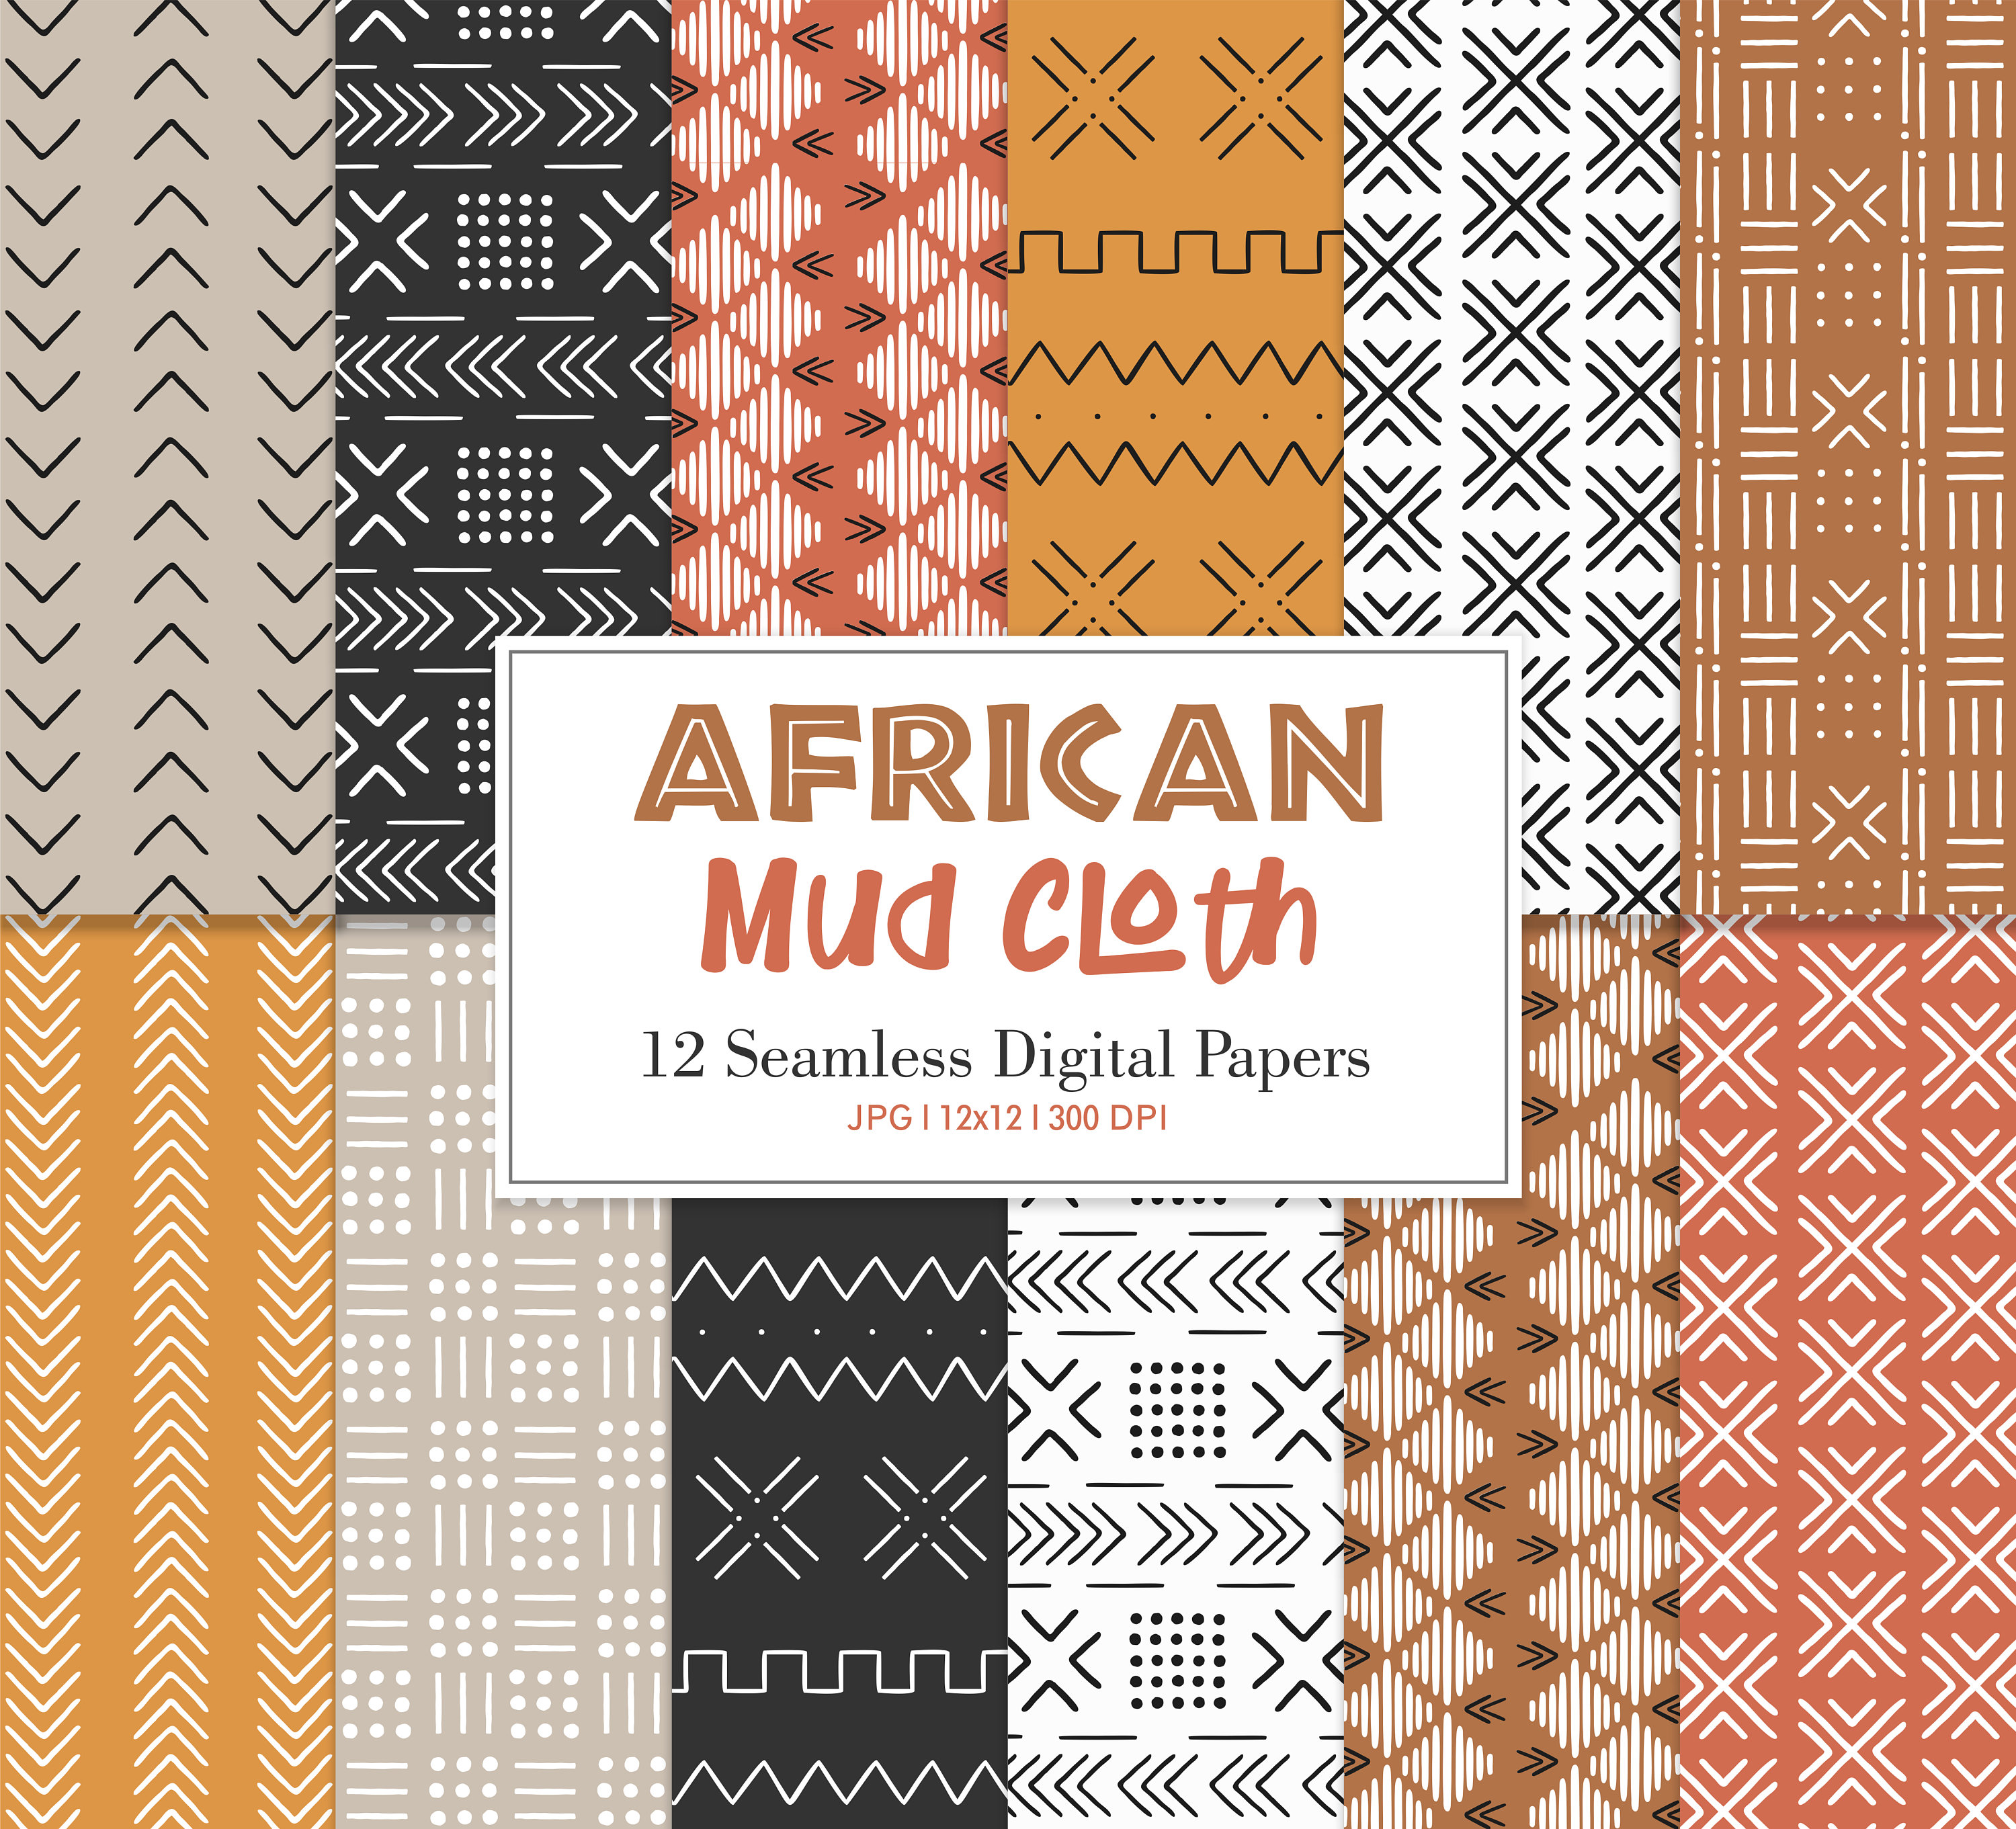 AFRICAN MUD CLOTH, African Mud Cloth Seamless Repeat Pattern